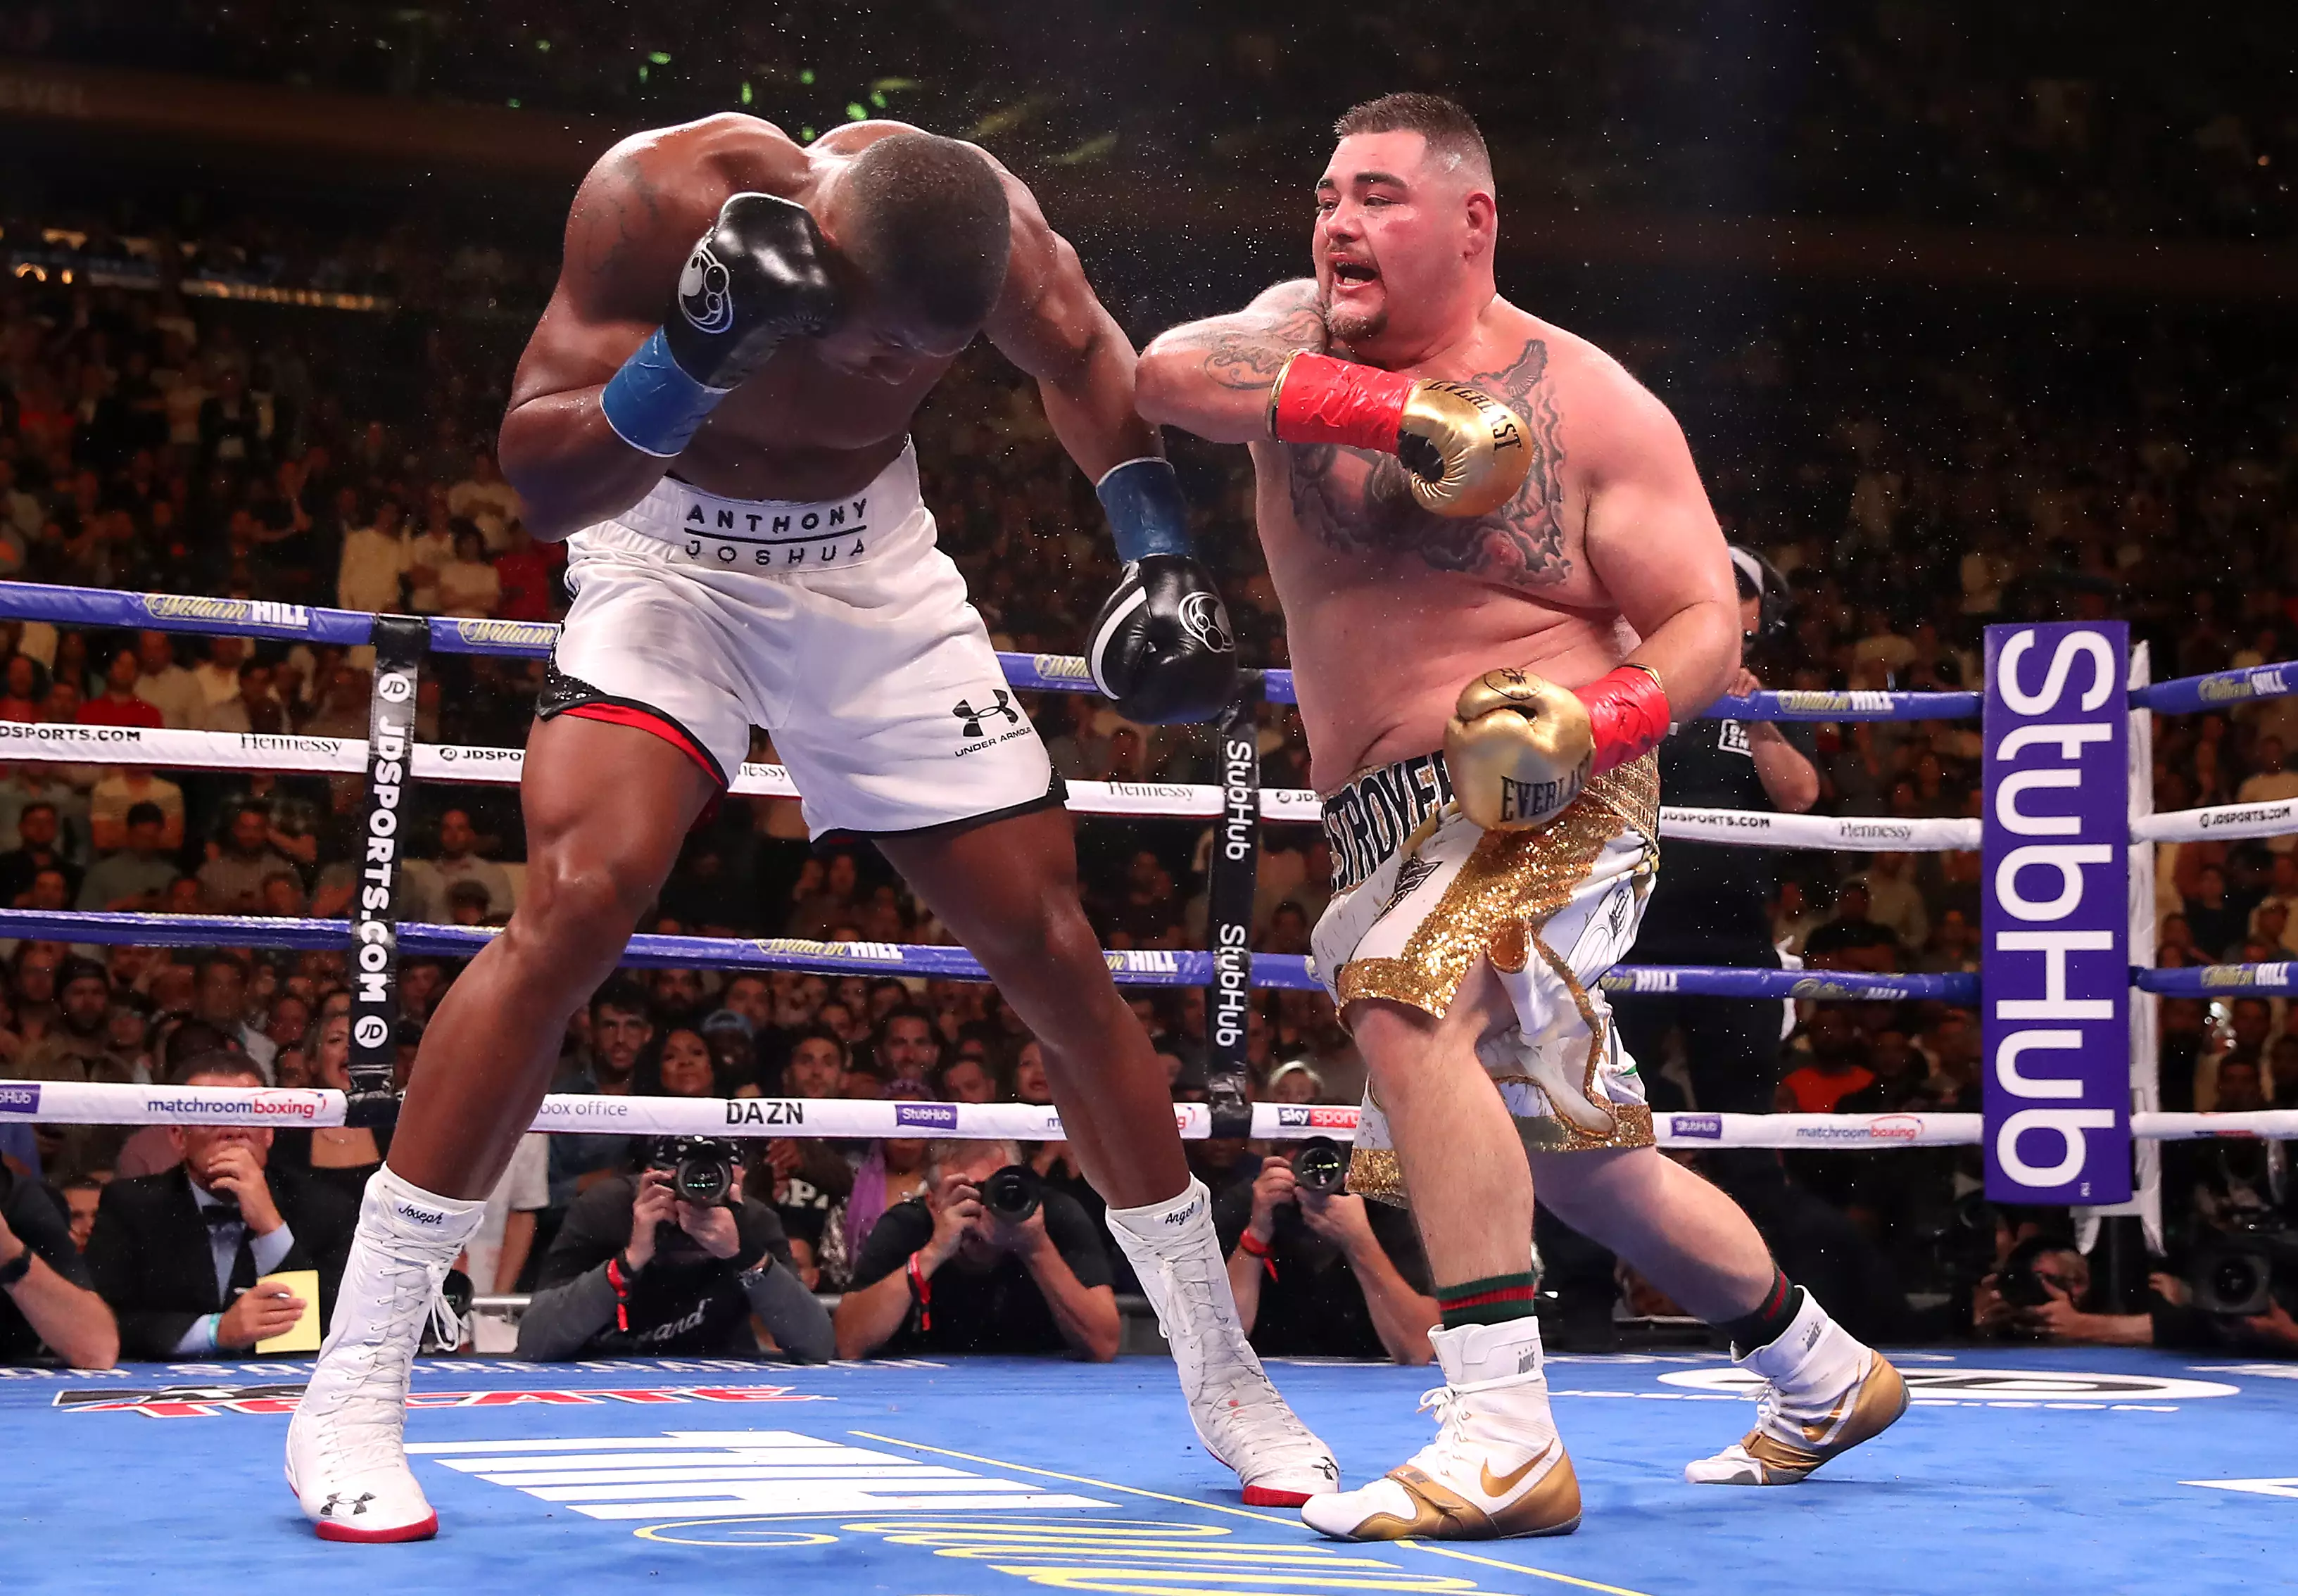 Andy Ruiz stunned the world when he knocked out Anthony Joshua last month at Madison Square Garden